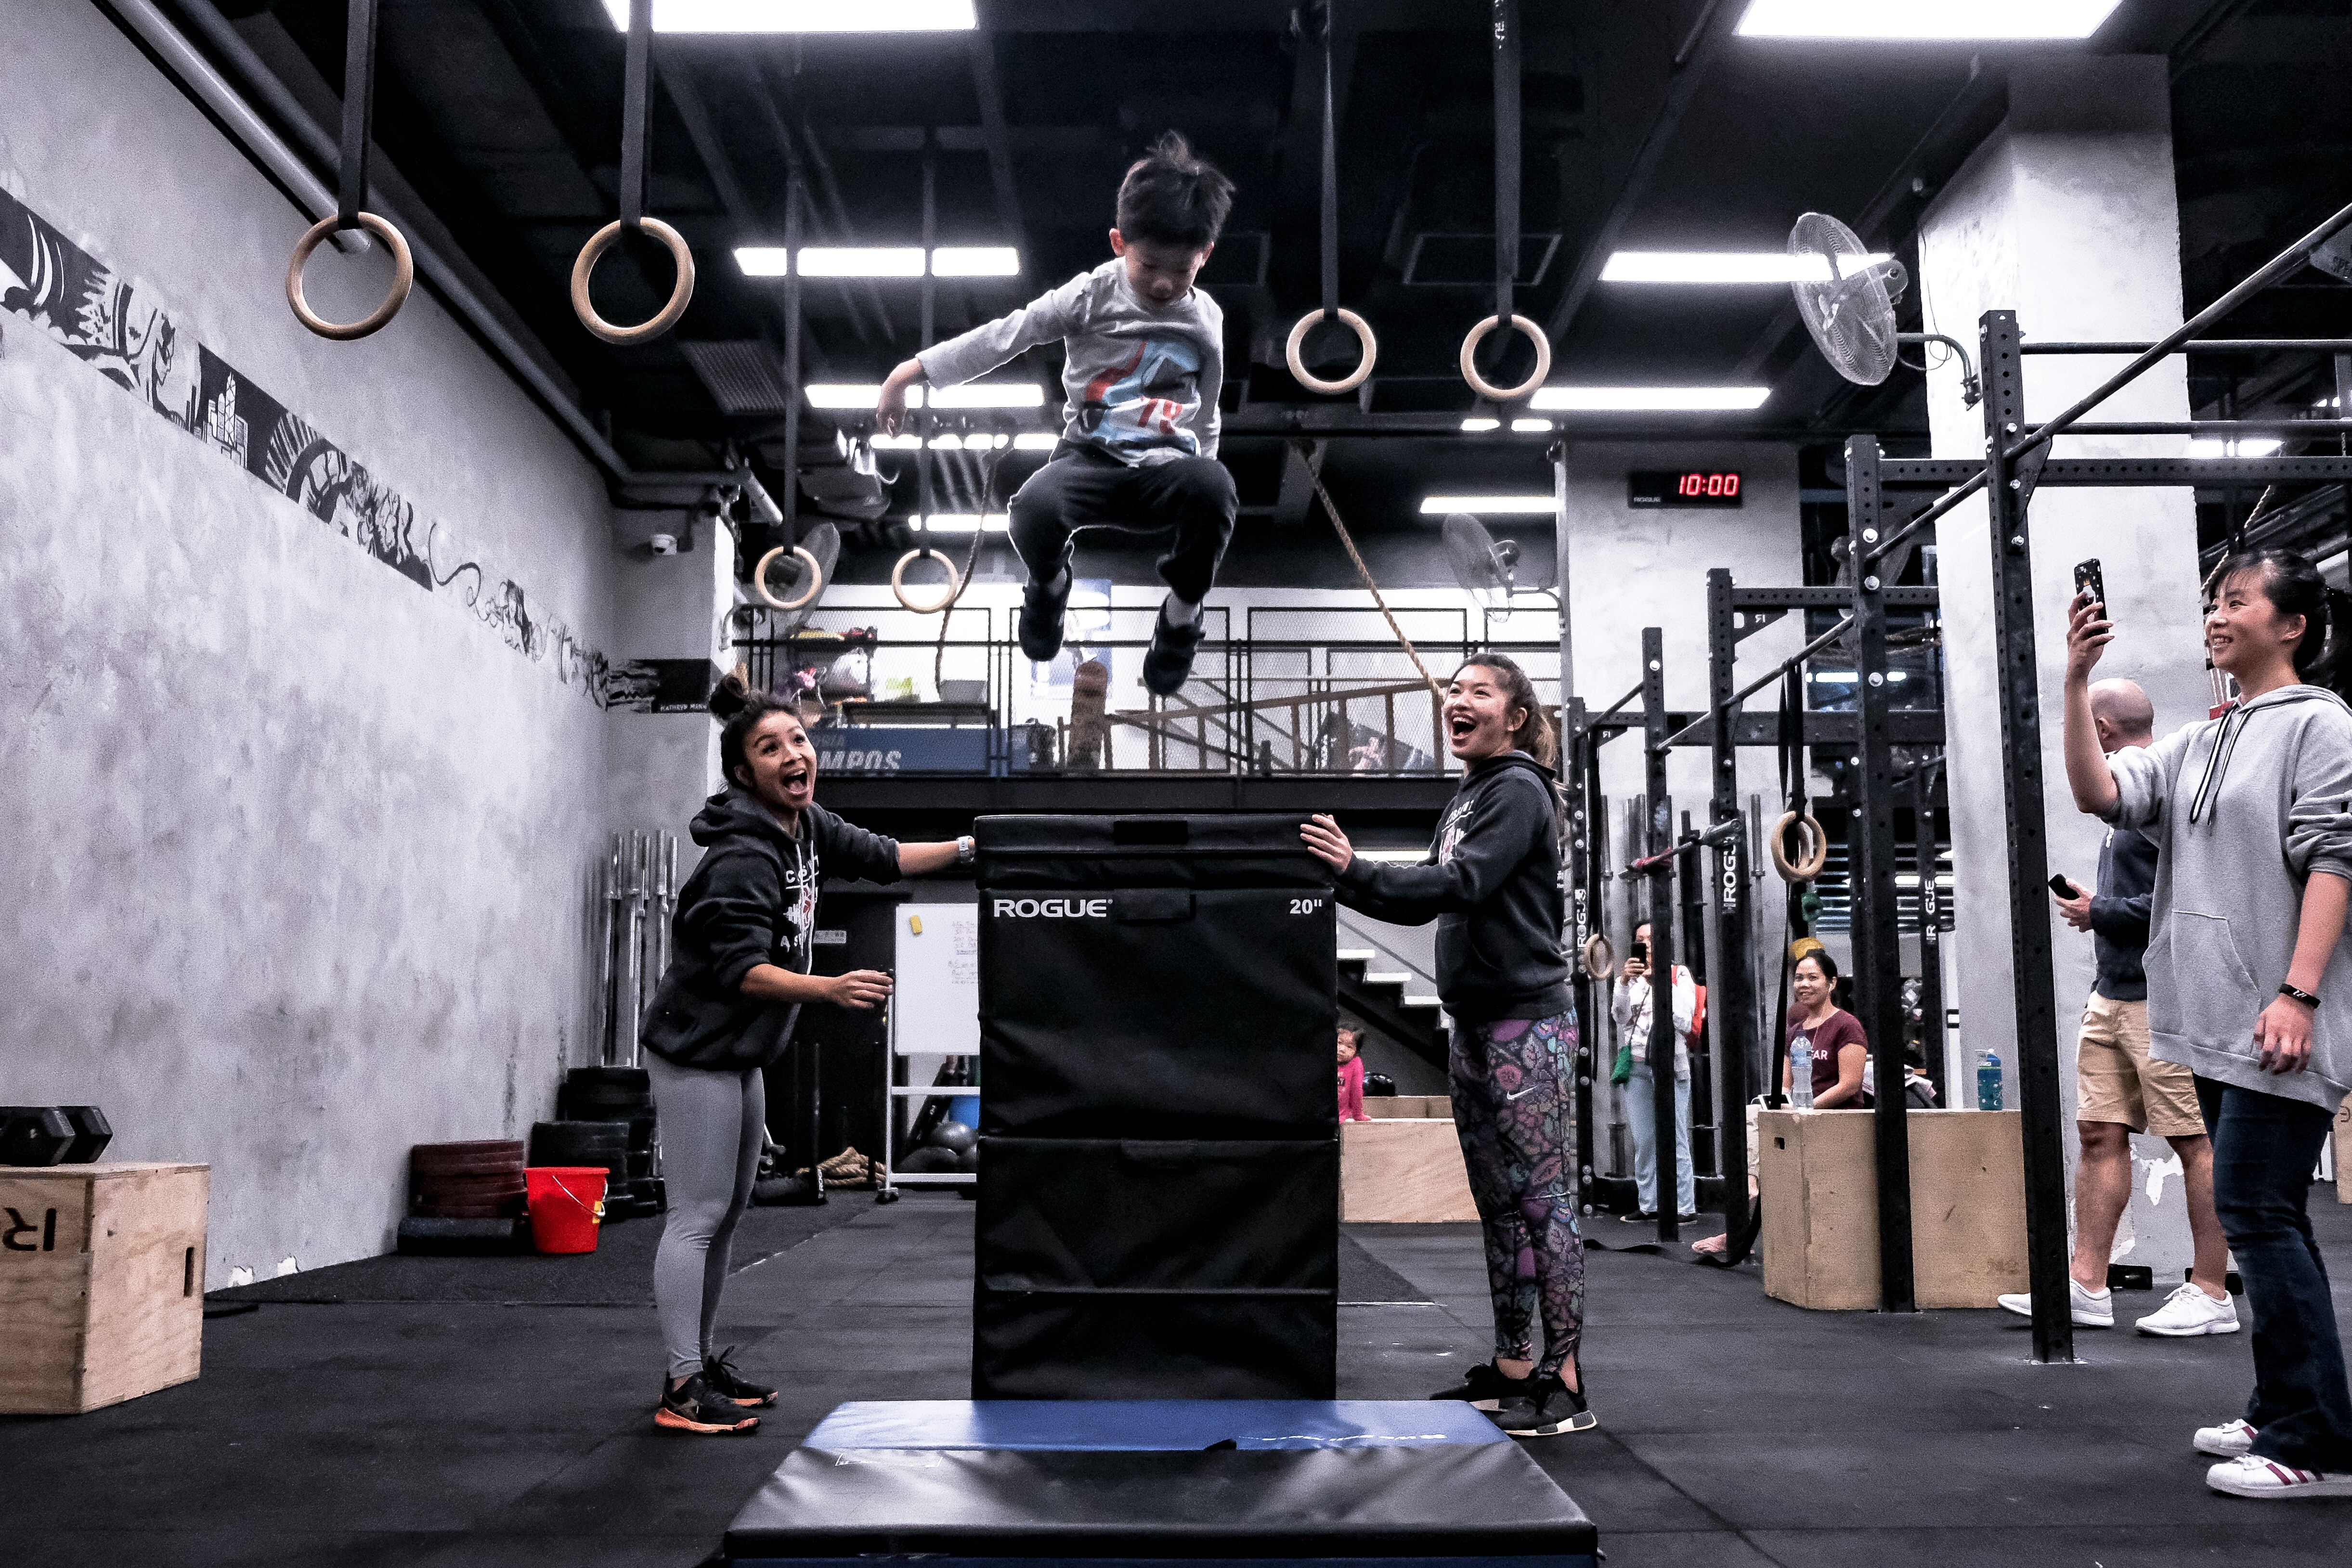 CrossFit Asphodel continues its push to get kids moving at an early age through fitness. Photo: Handout.